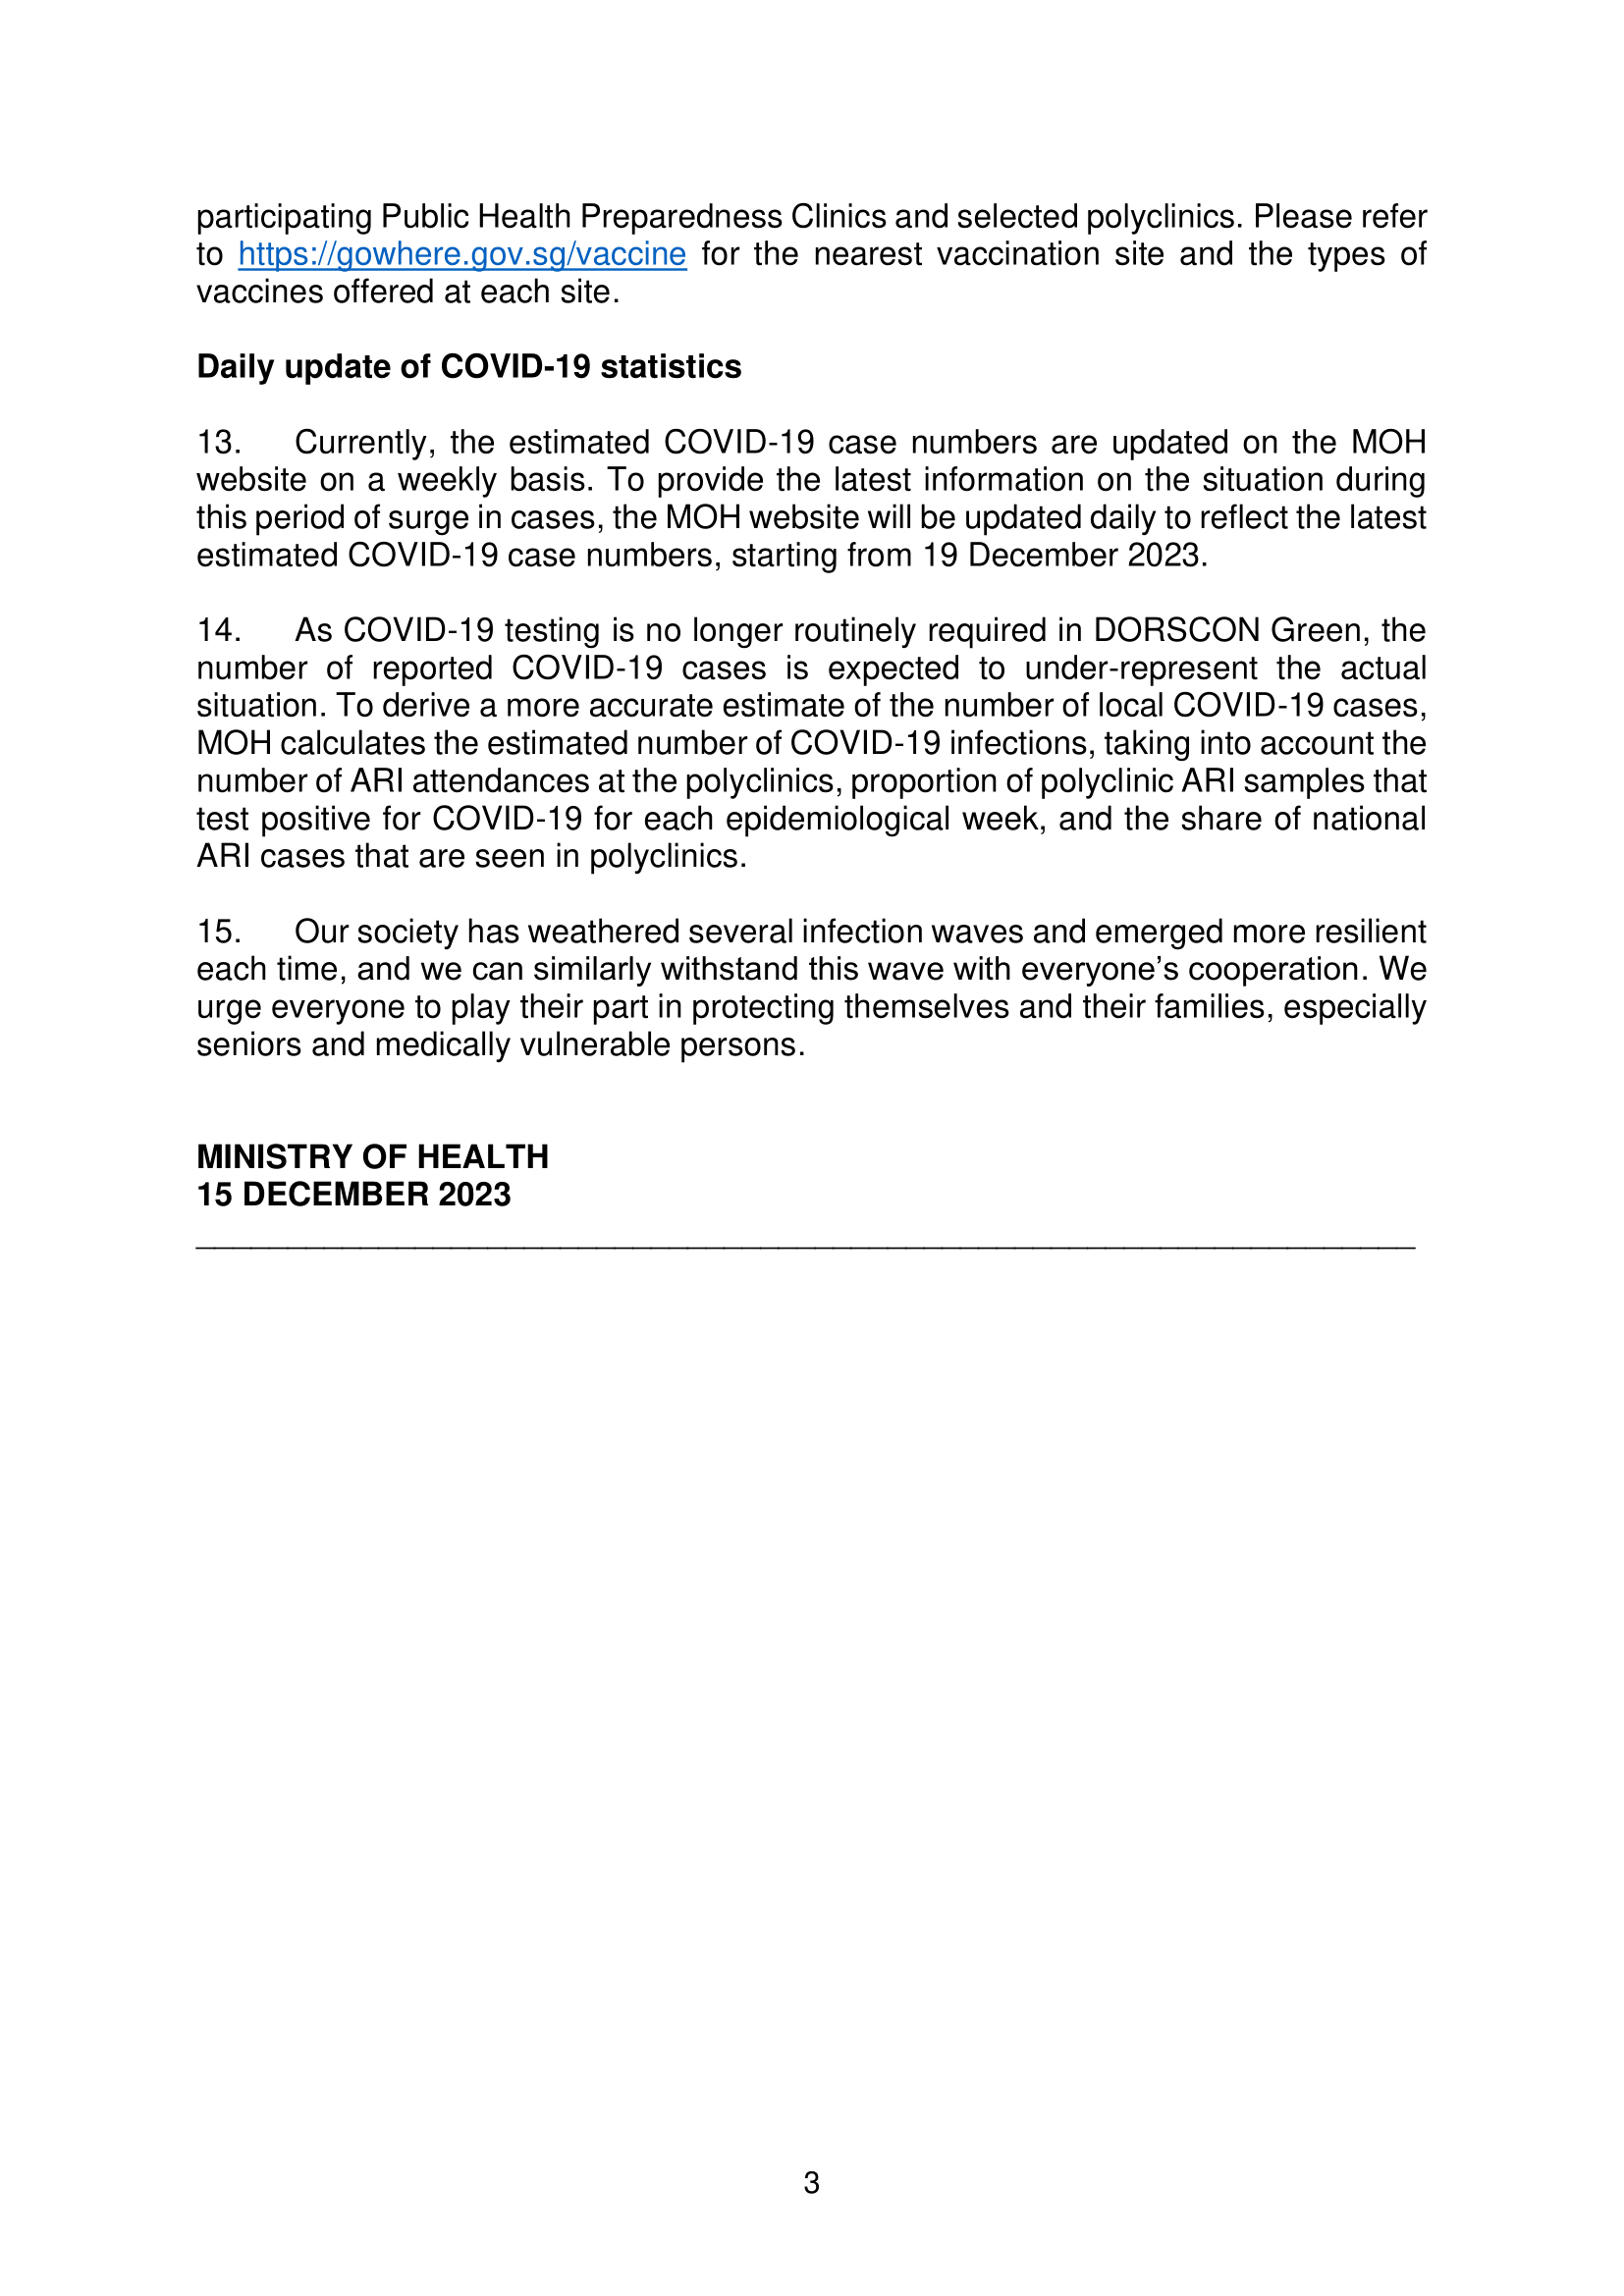 [MOH Connected] Press Release - Update on Local COVID-19 Situation and Measures to Protect Healthcare Capacity-3.png